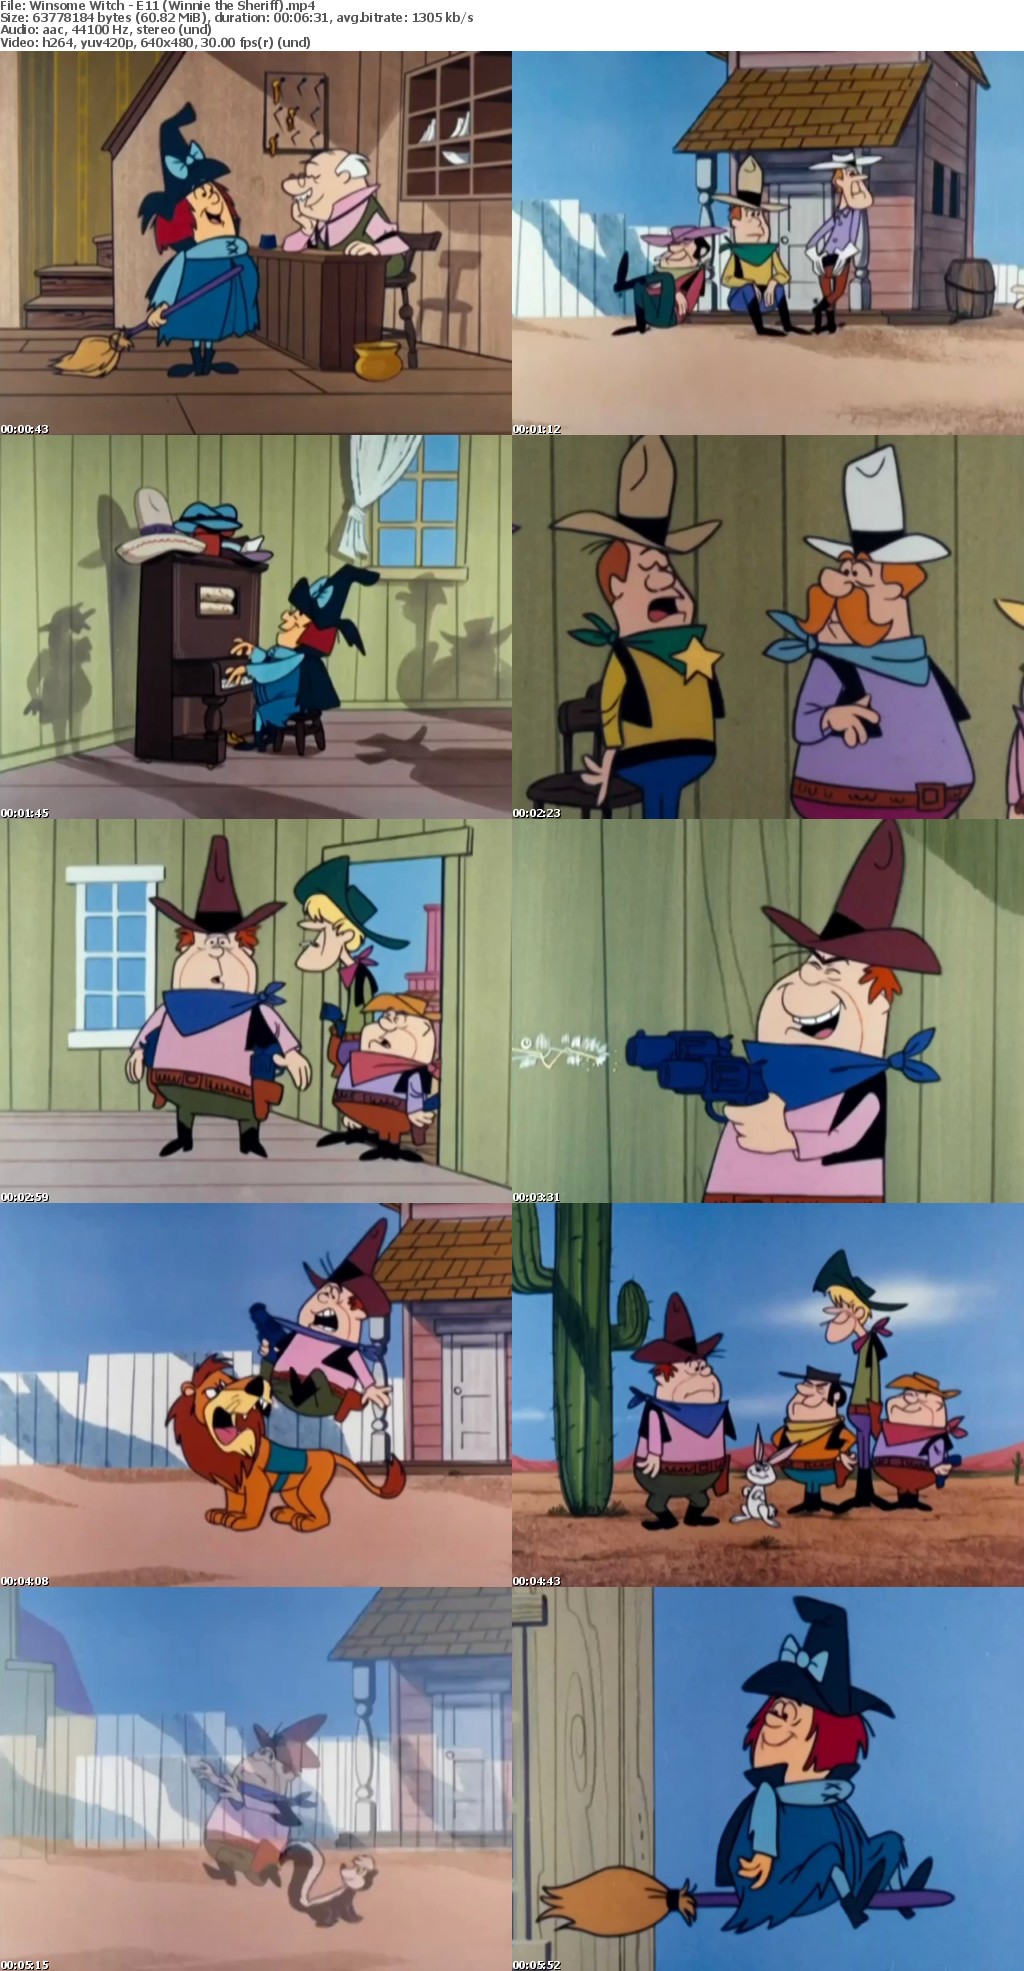 Winsome Witch (Complete cartoon series in MP4 format) Lando18